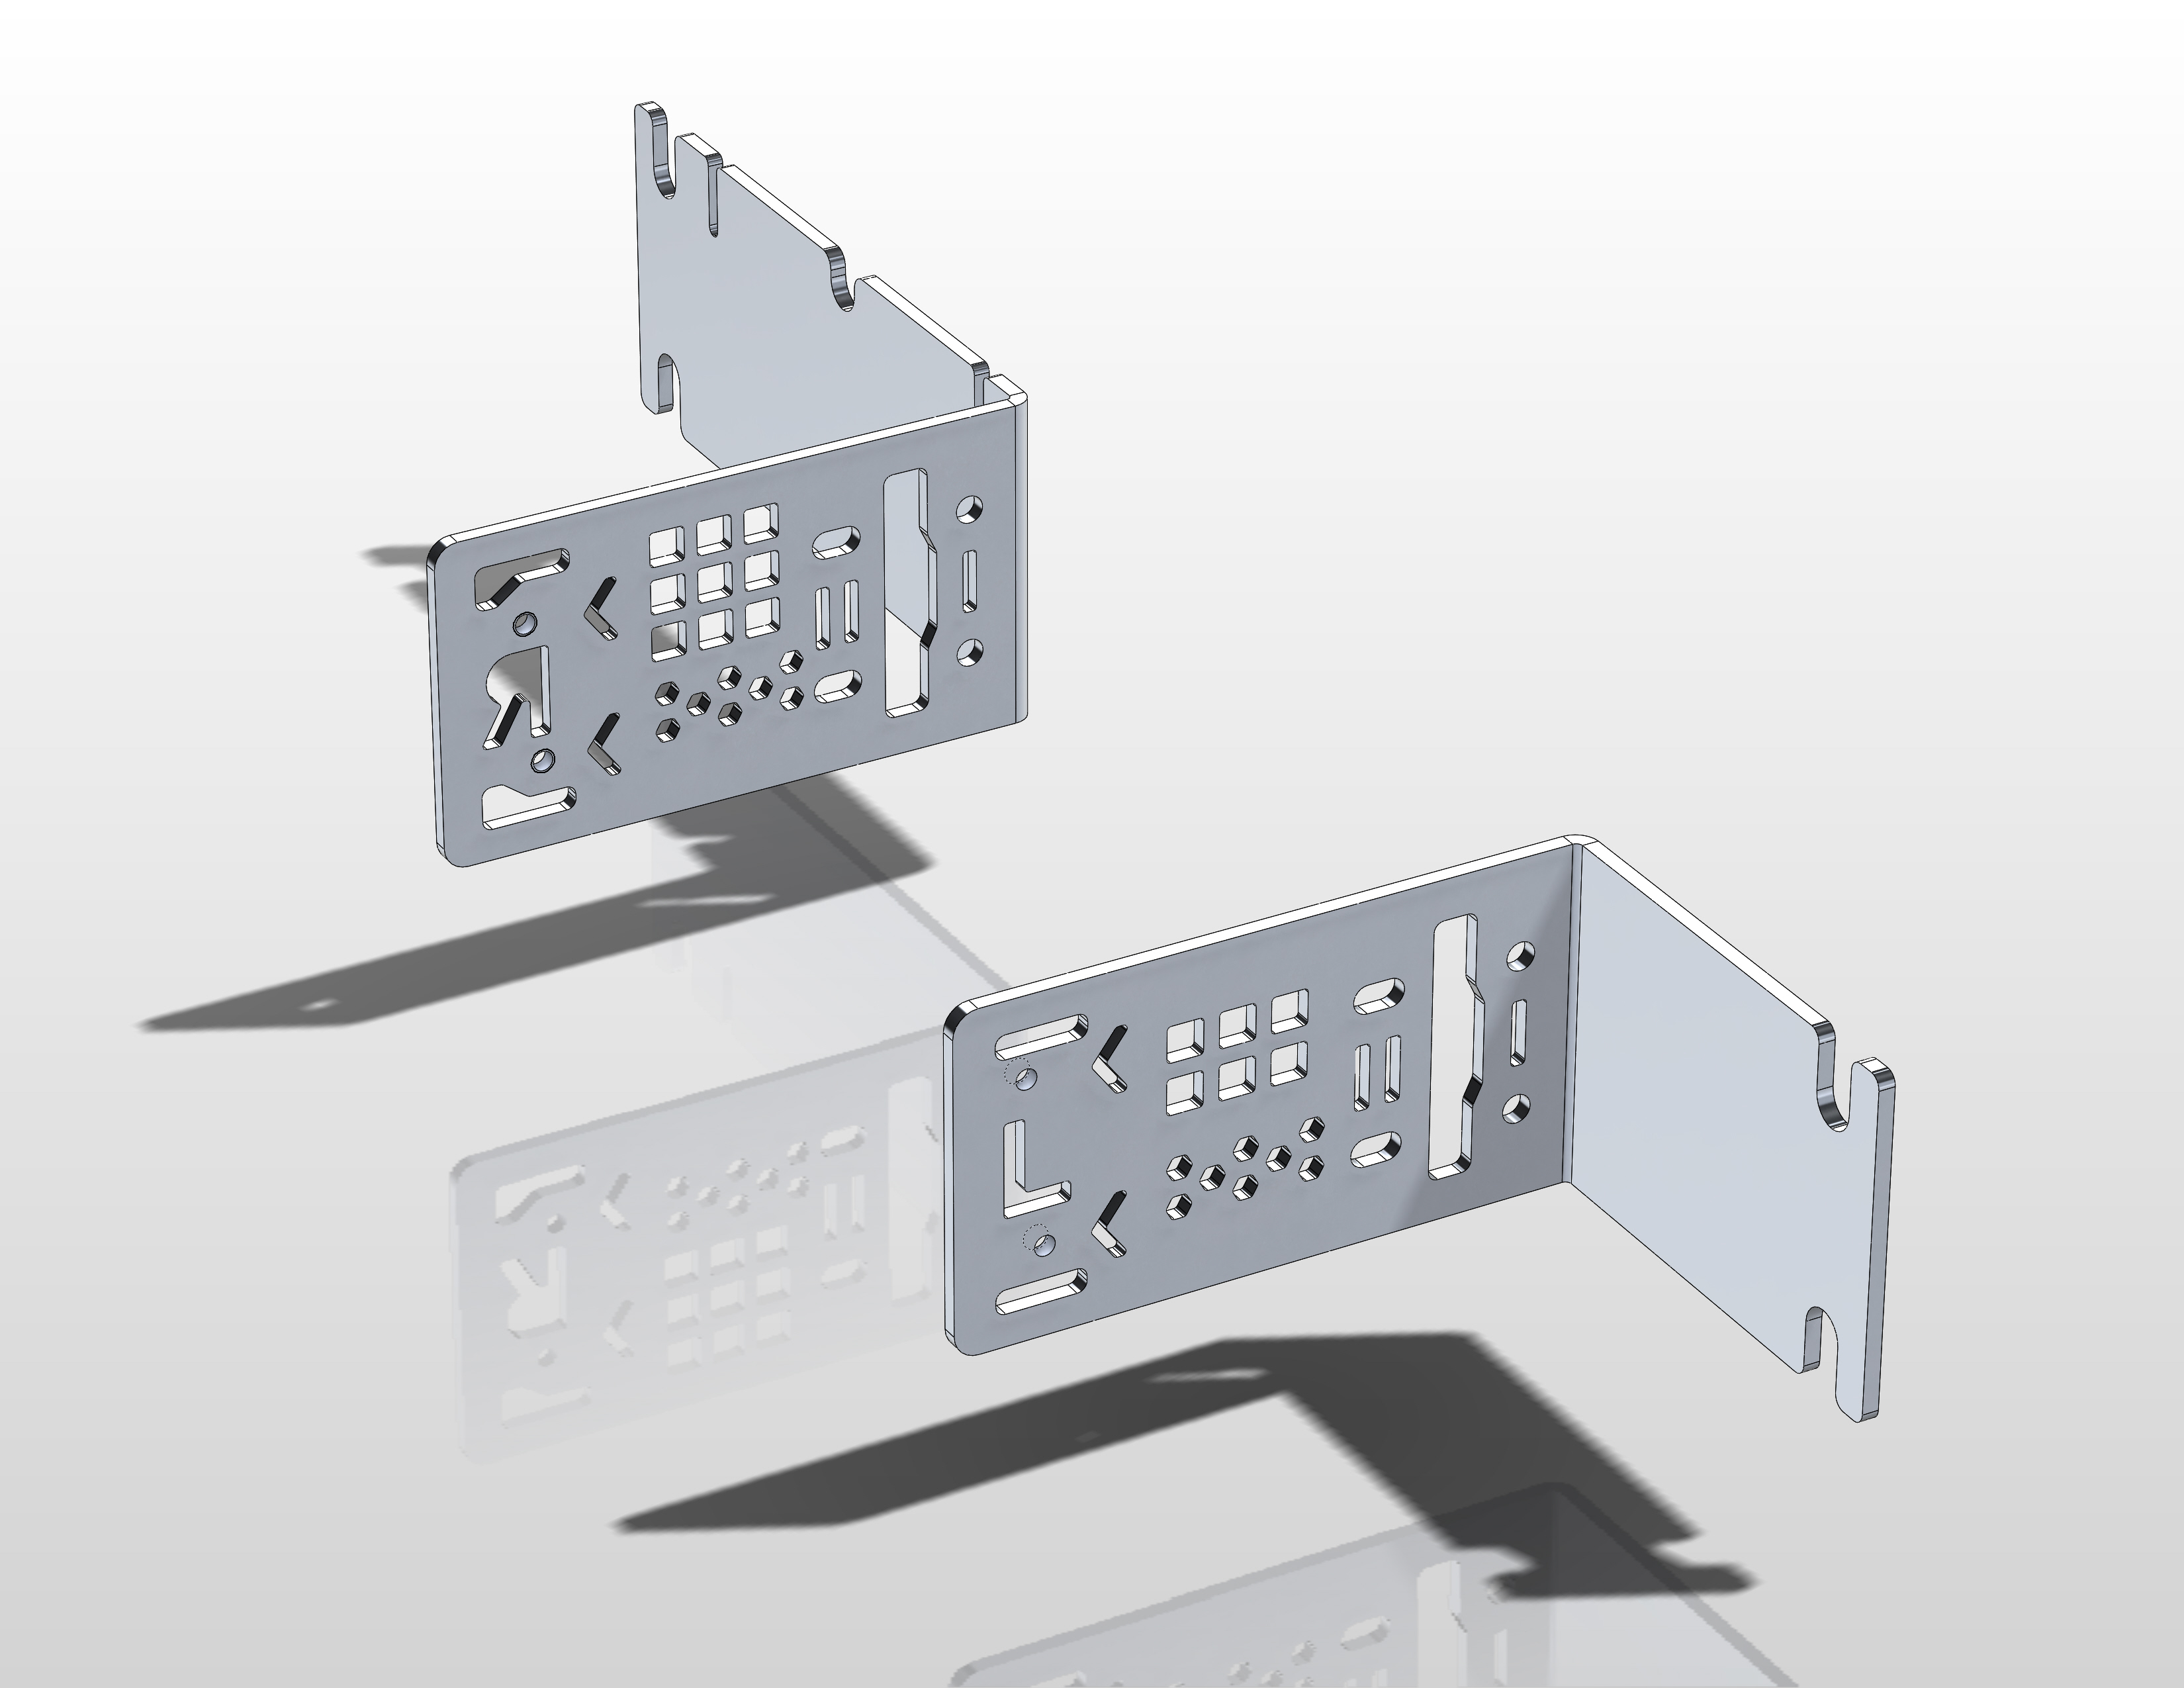 Redesigned Rack Mount for Cisco 800 series